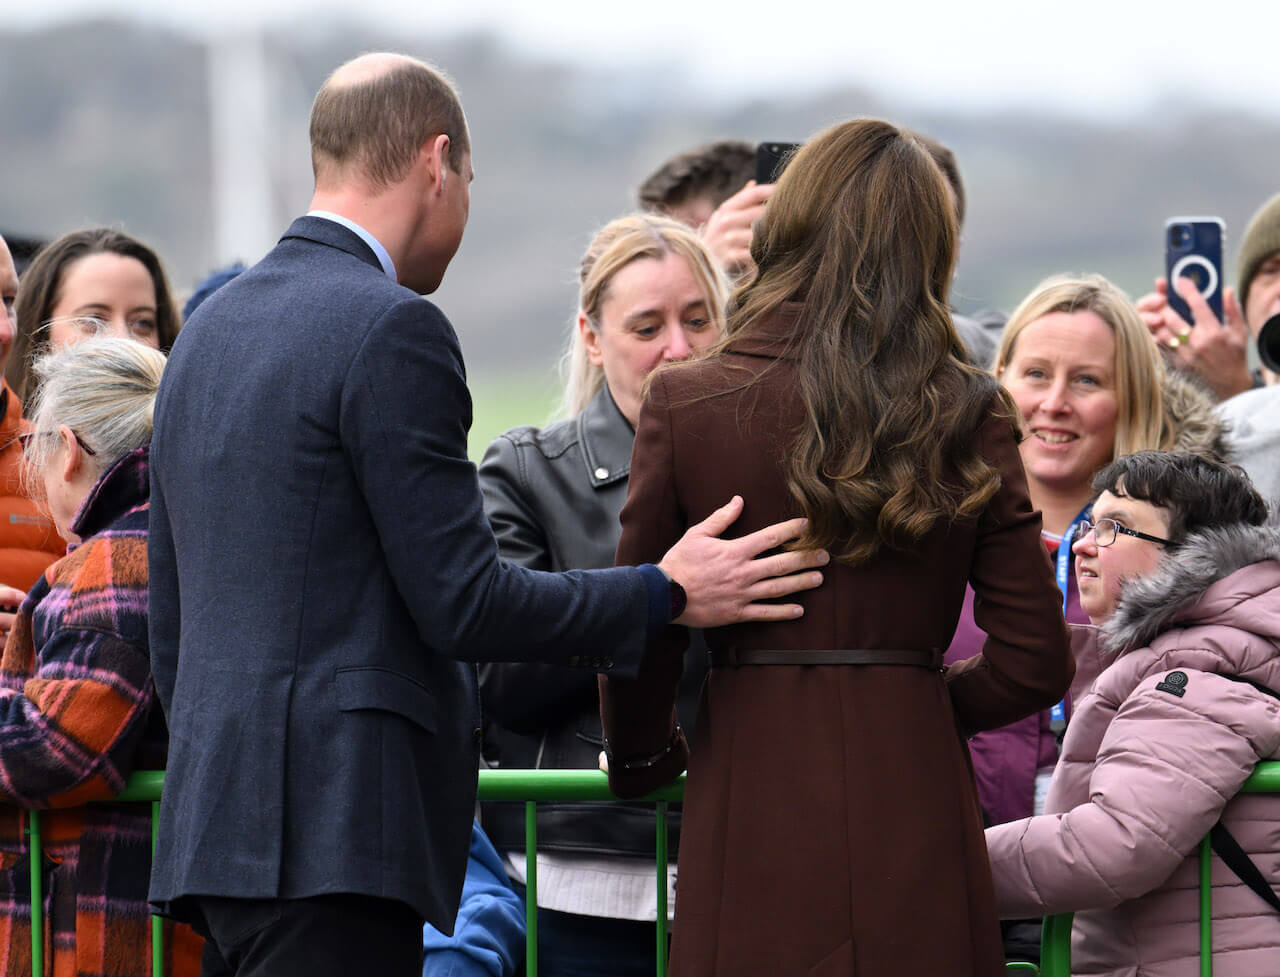 Prince William and Kate Middleton visit the National Maritime Museum Cornwall on February 09, 2023 in Falmouth, England. Their Royal Highnesses are visiting Cornwall for the first time since becoming the Duke and Duchess of Cornwall.